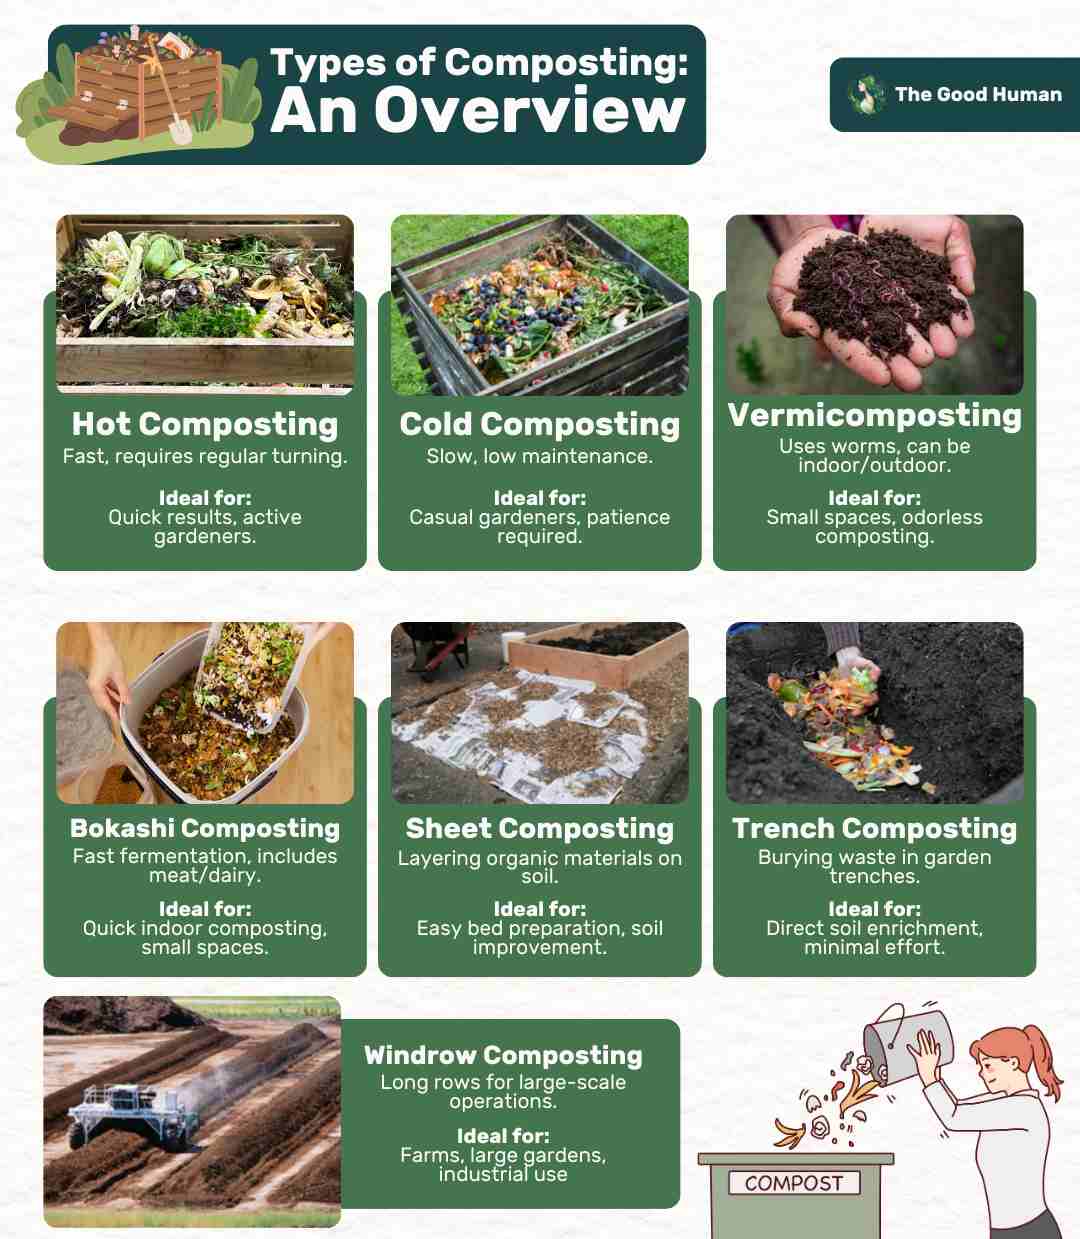 An overview of the types of composting.